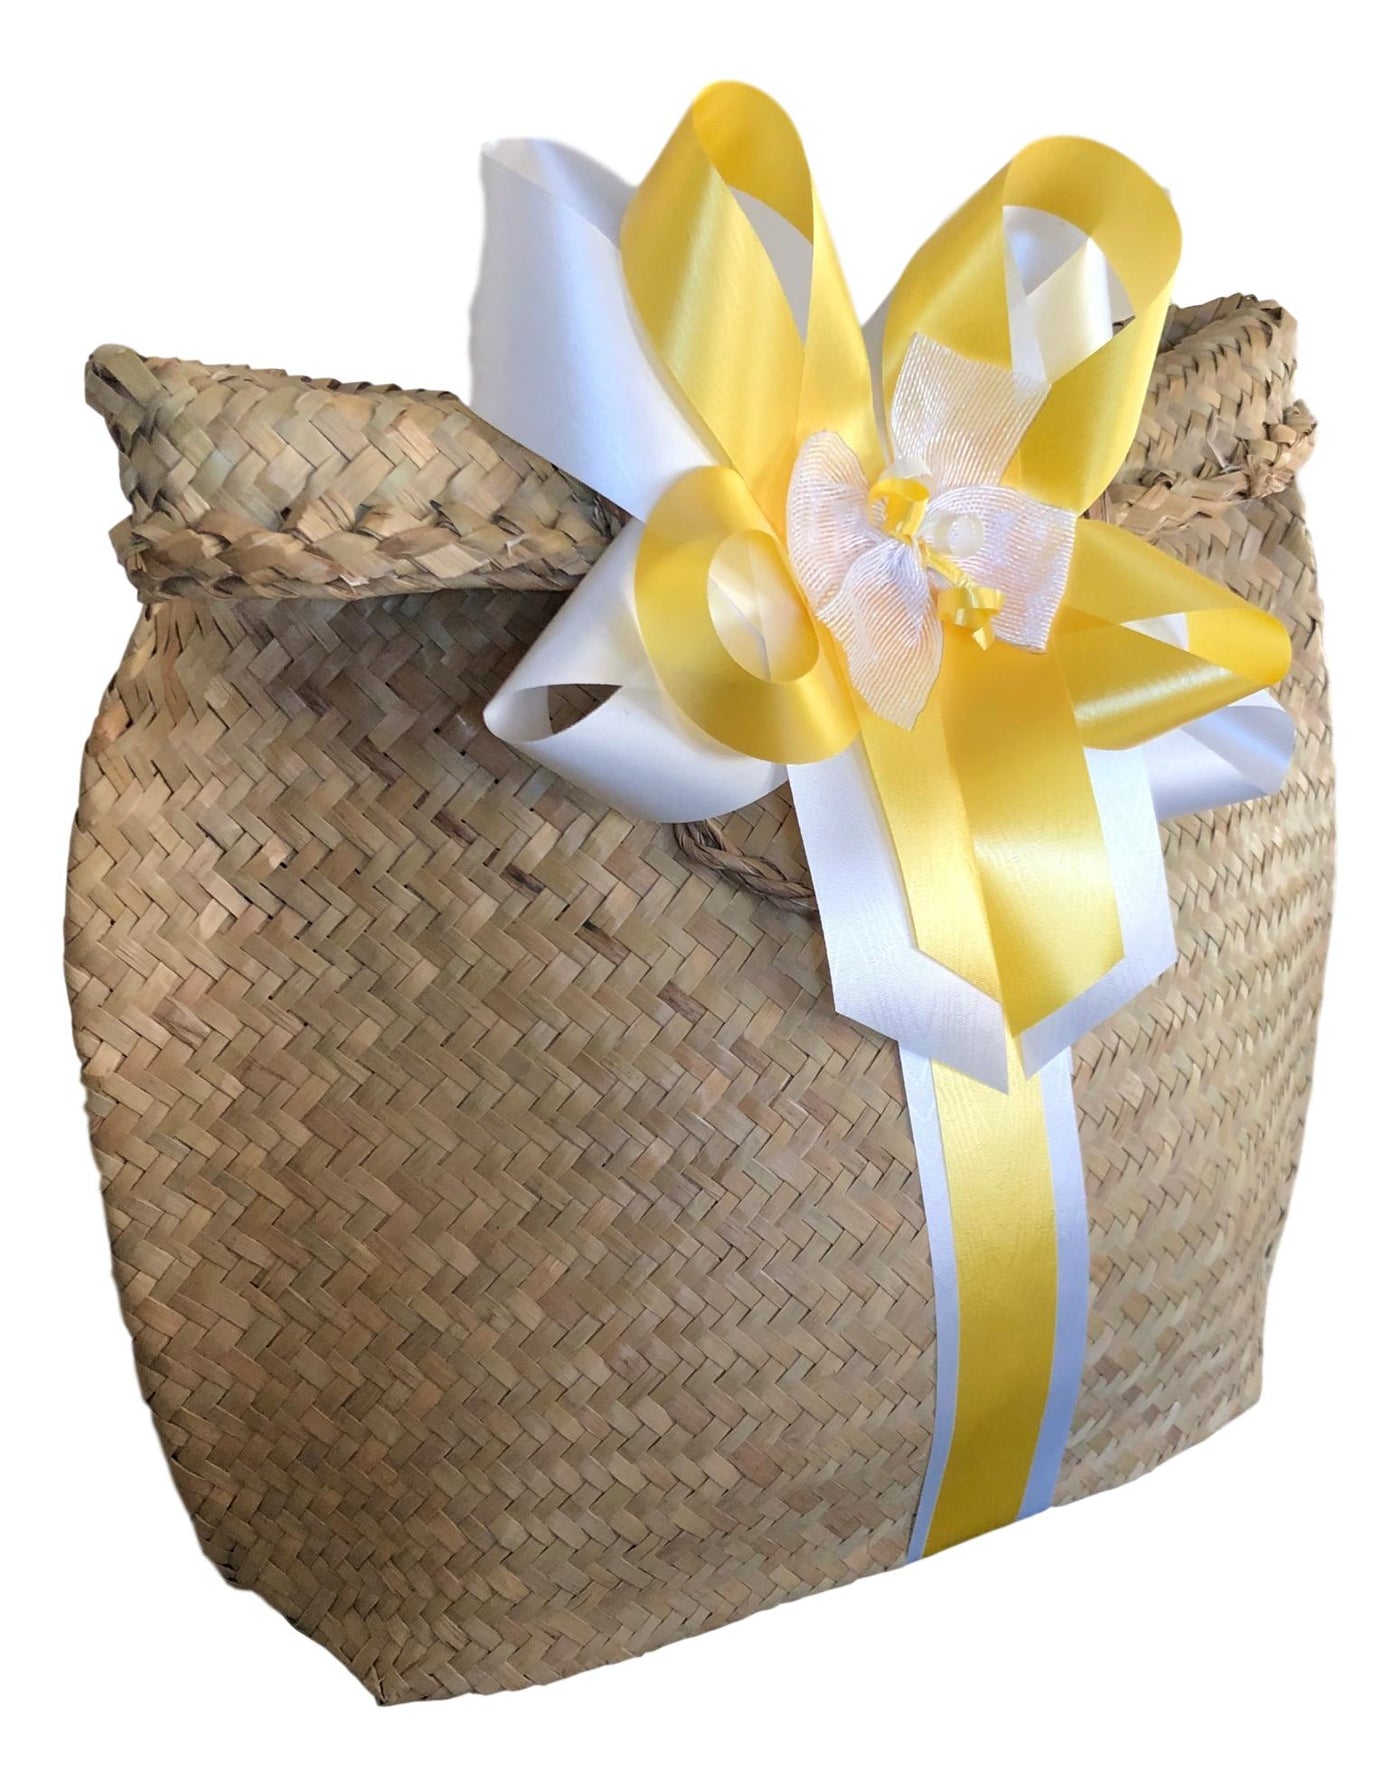 Gluten Free Hampers For Coeliacs - Basket Creations